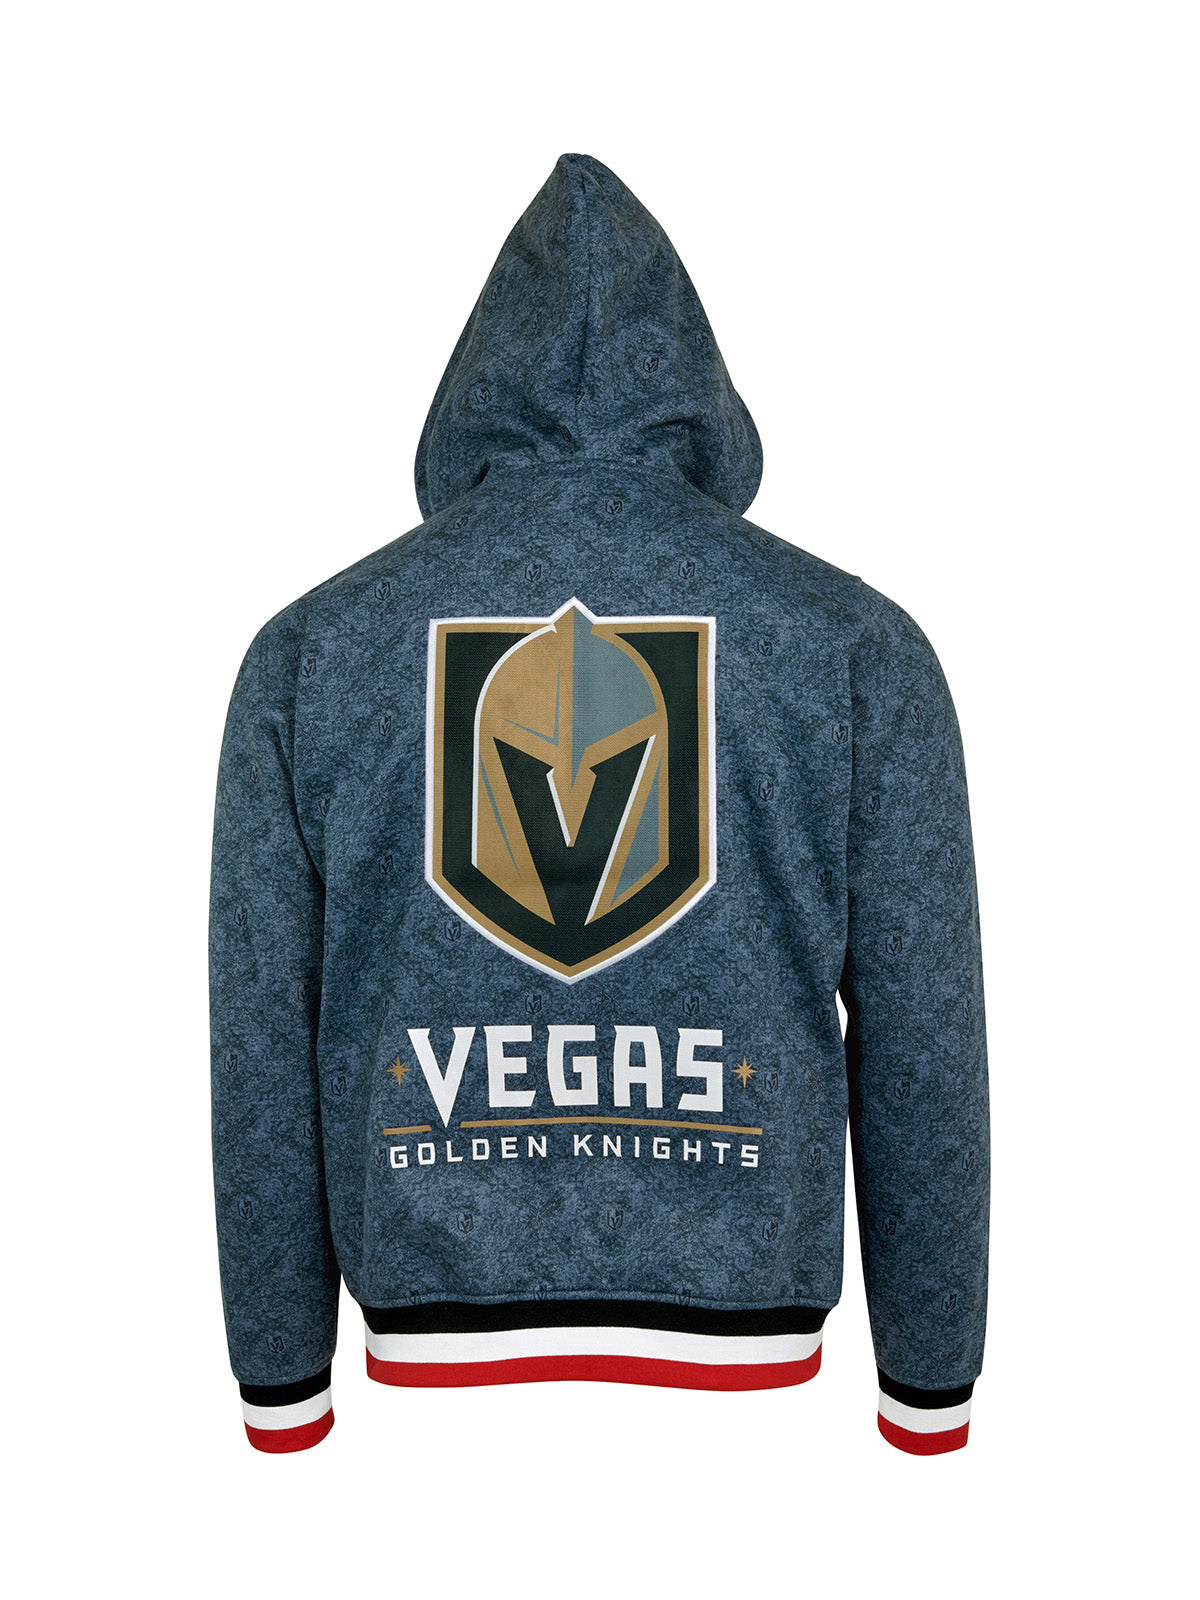 Vegas Golden Knights Hoodie - Show your team spirit, with the iconic team logo patch centered on the back, and proudly display your Vegas Golden Knights support in their team colors with this NHL hockey hoodie.